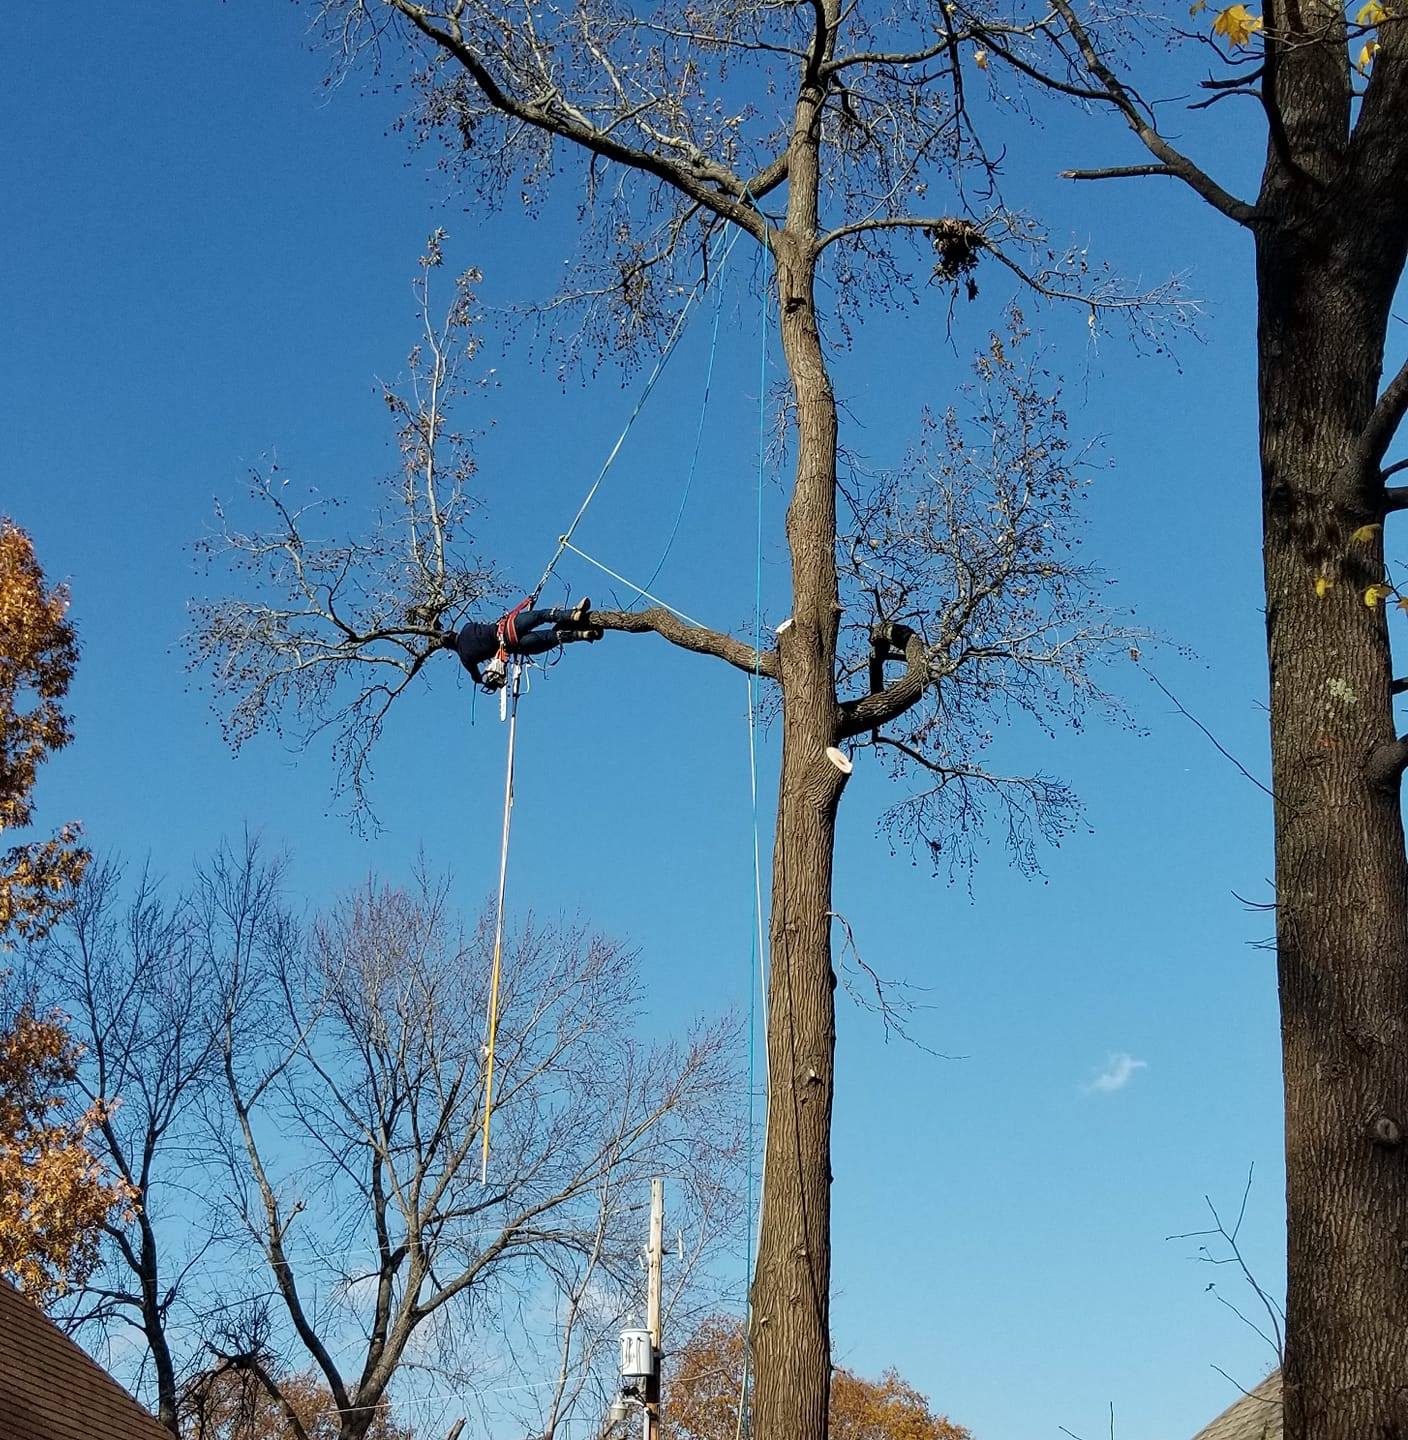 Arborist horizontal in tree with ropes holding him on